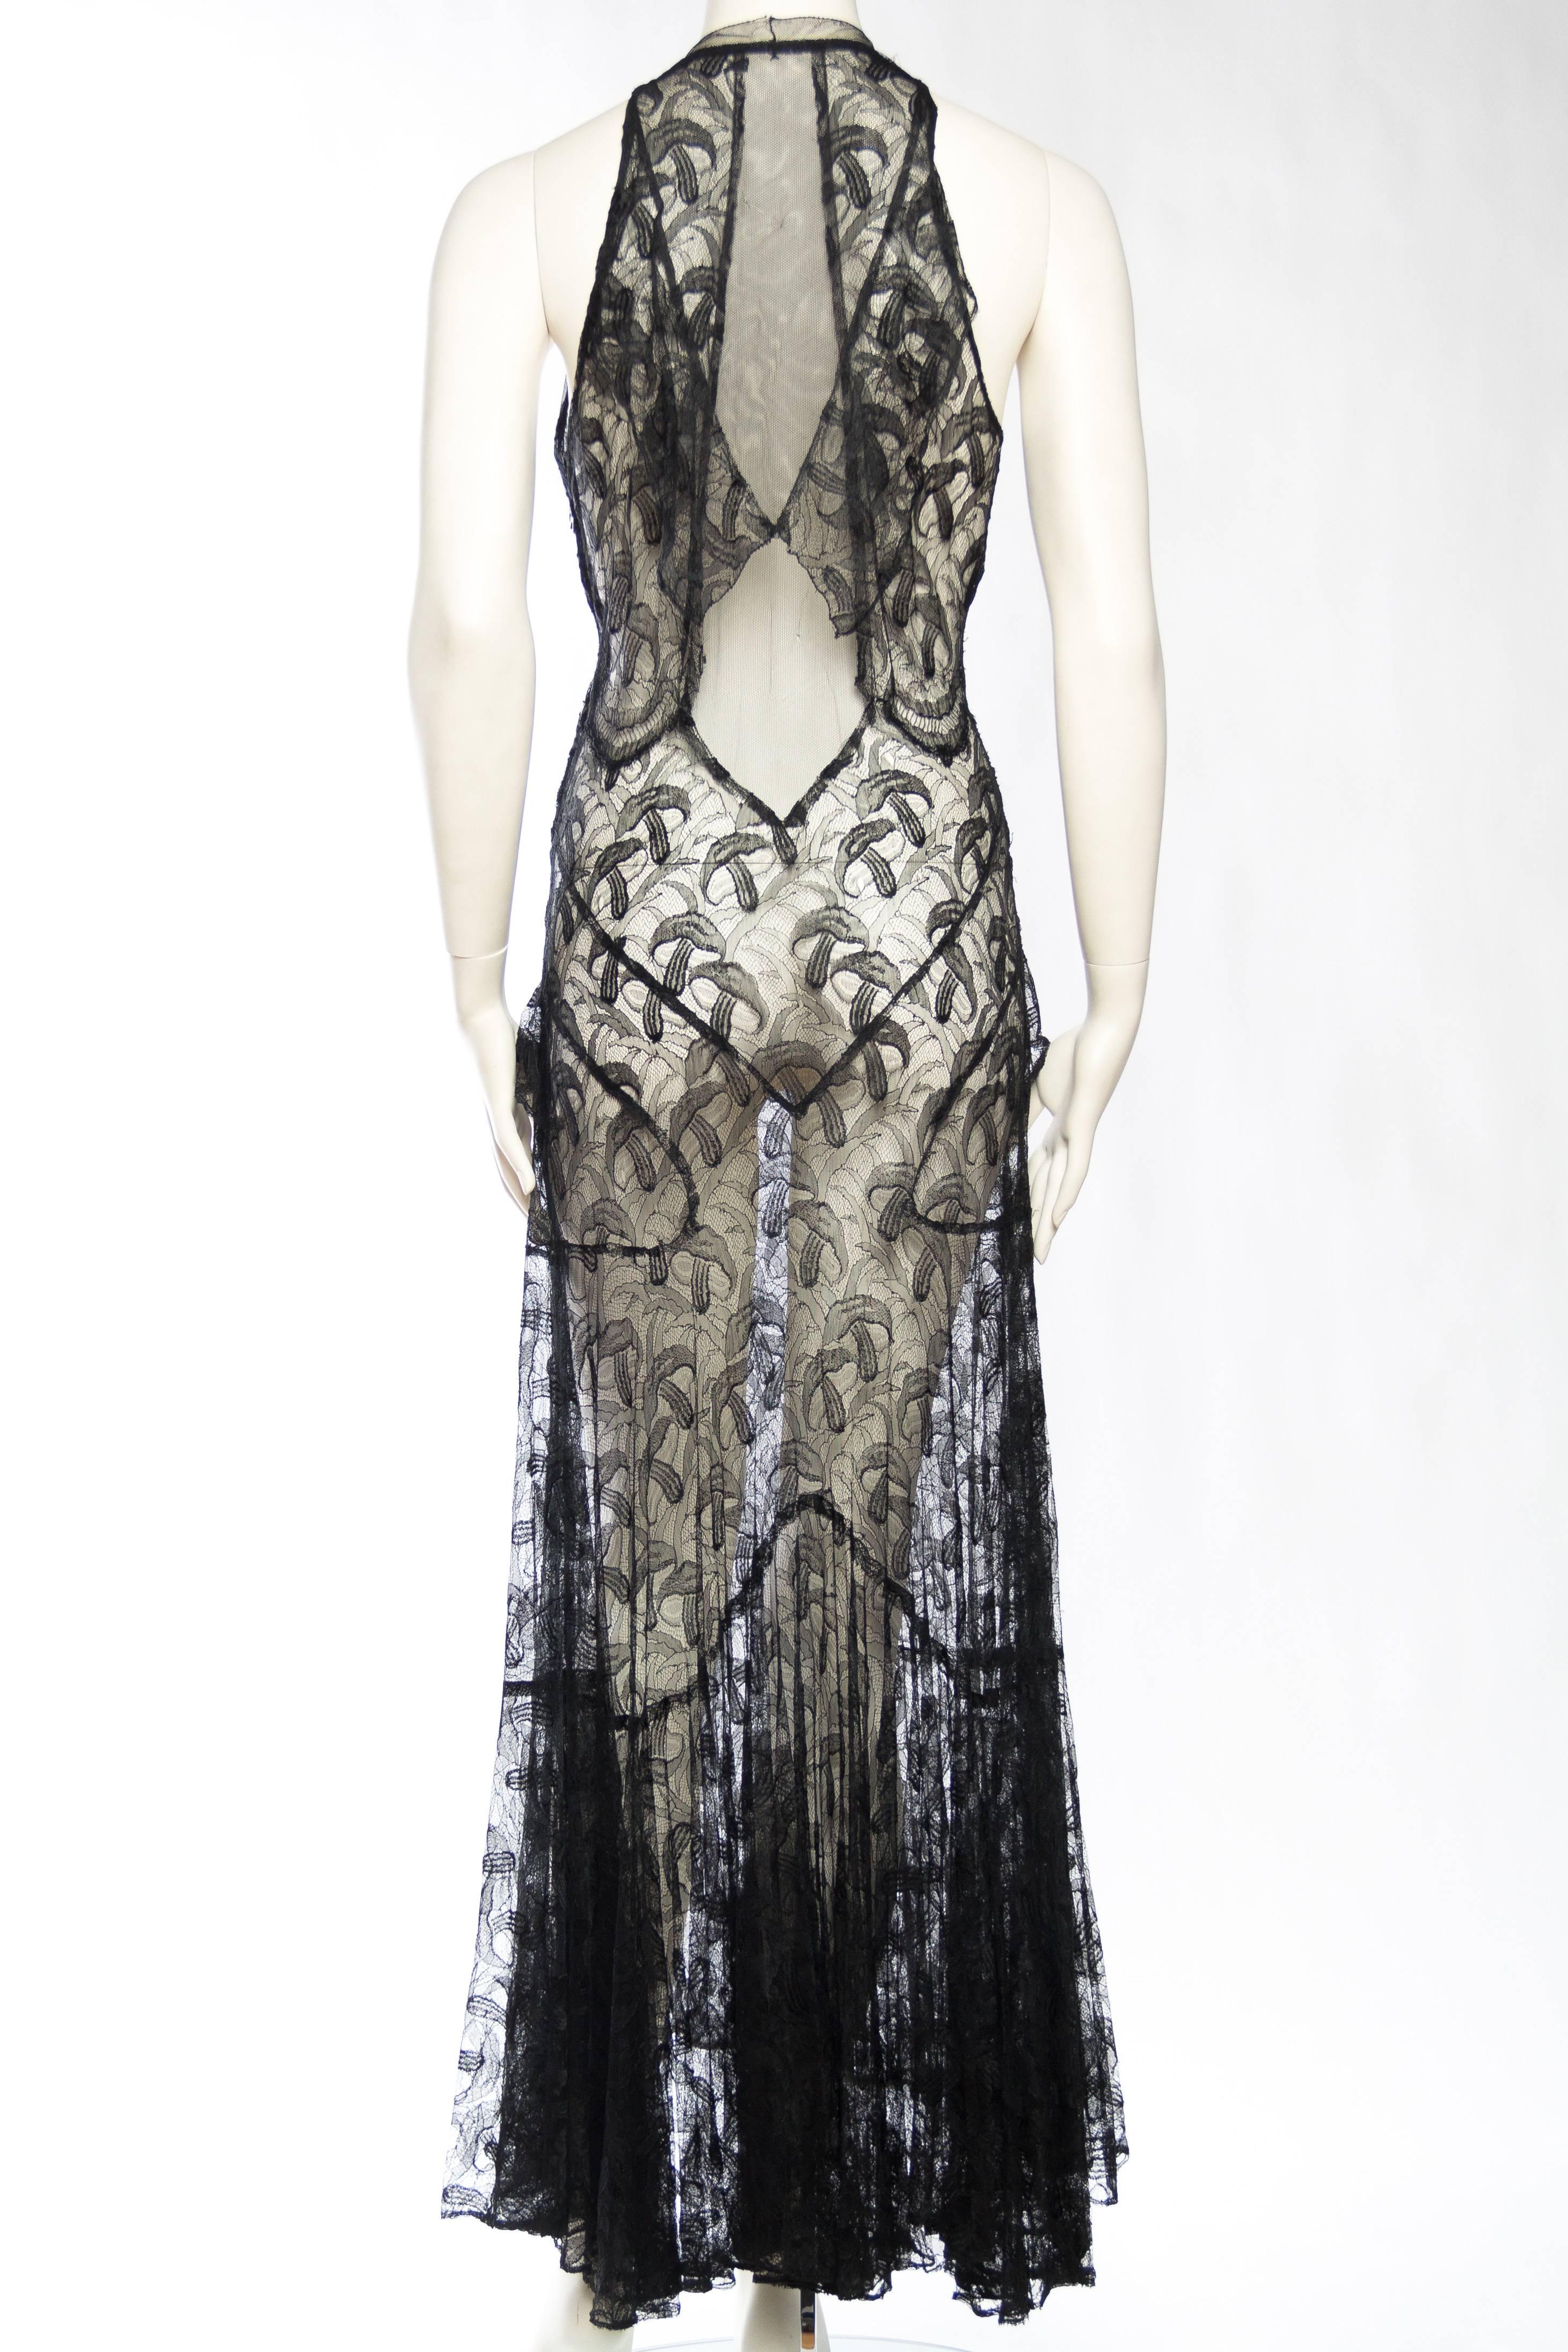 Women's 1930s Sheer Silk Lace and Net Gown